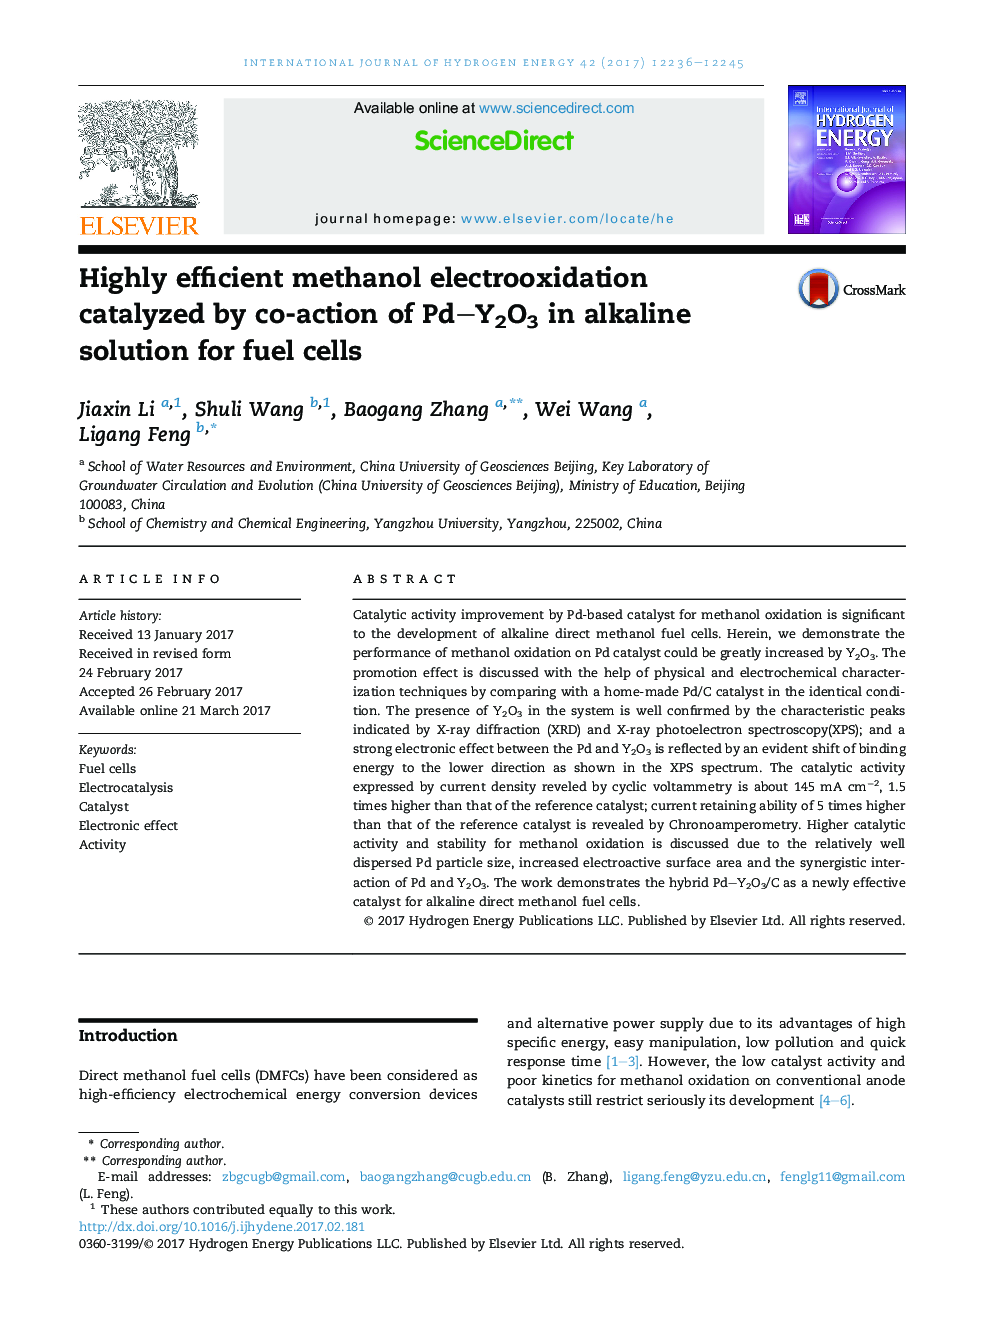 Highly efficient methanol electrooxidation catalyzed by co-action of PdY2O3 in alkaline solution for fuel cells